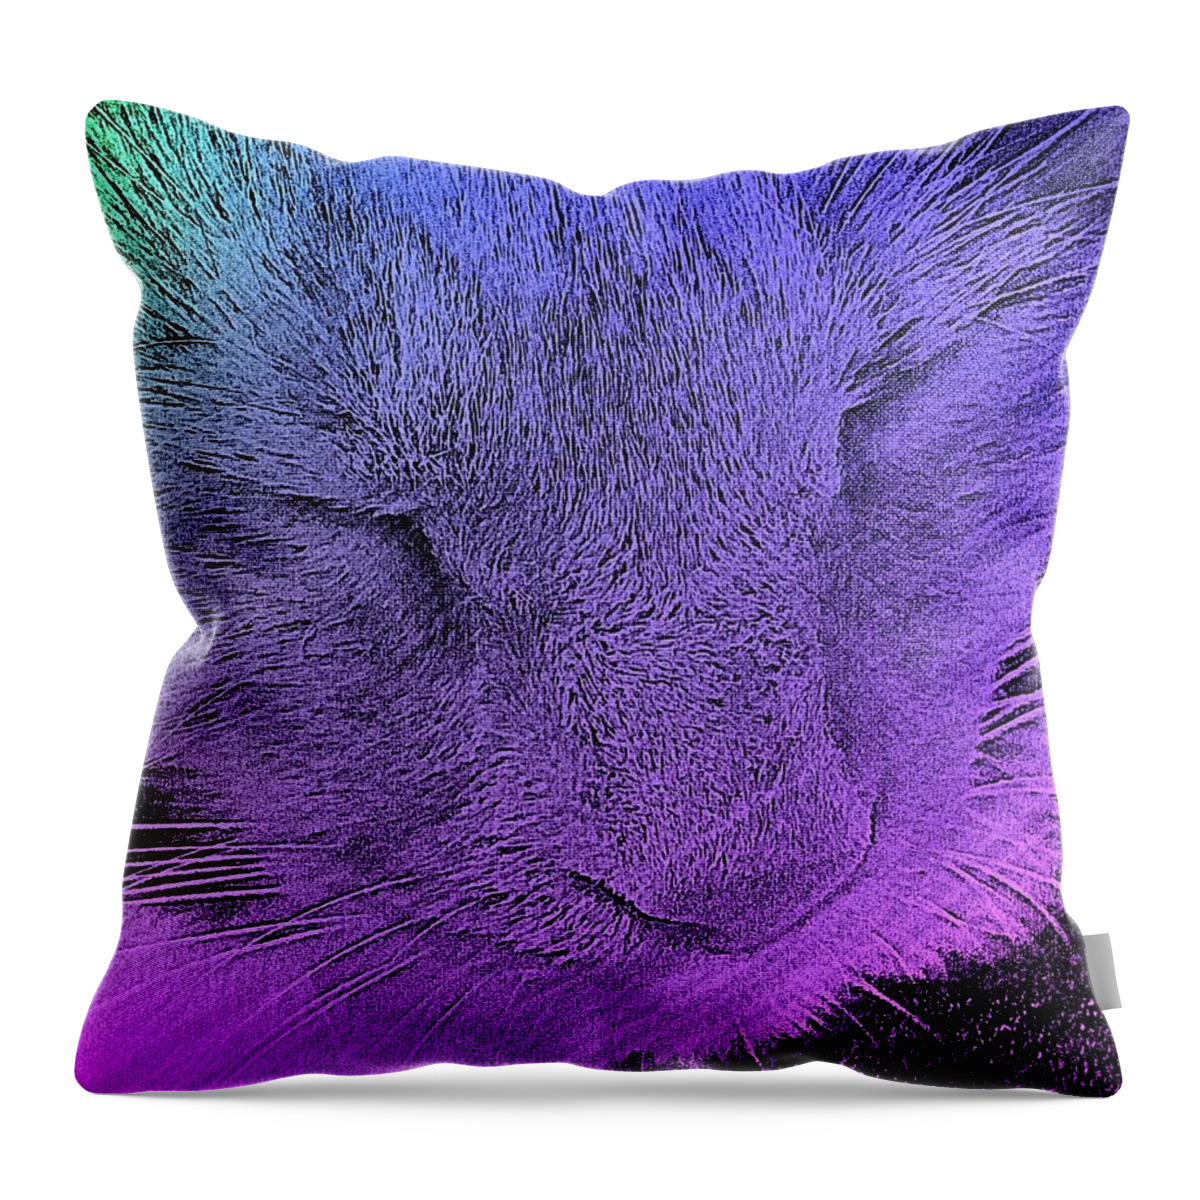 Artful Oasis Throw Pillow featuring the photograph Pineapple Sleeping 1 by Artful Oasis